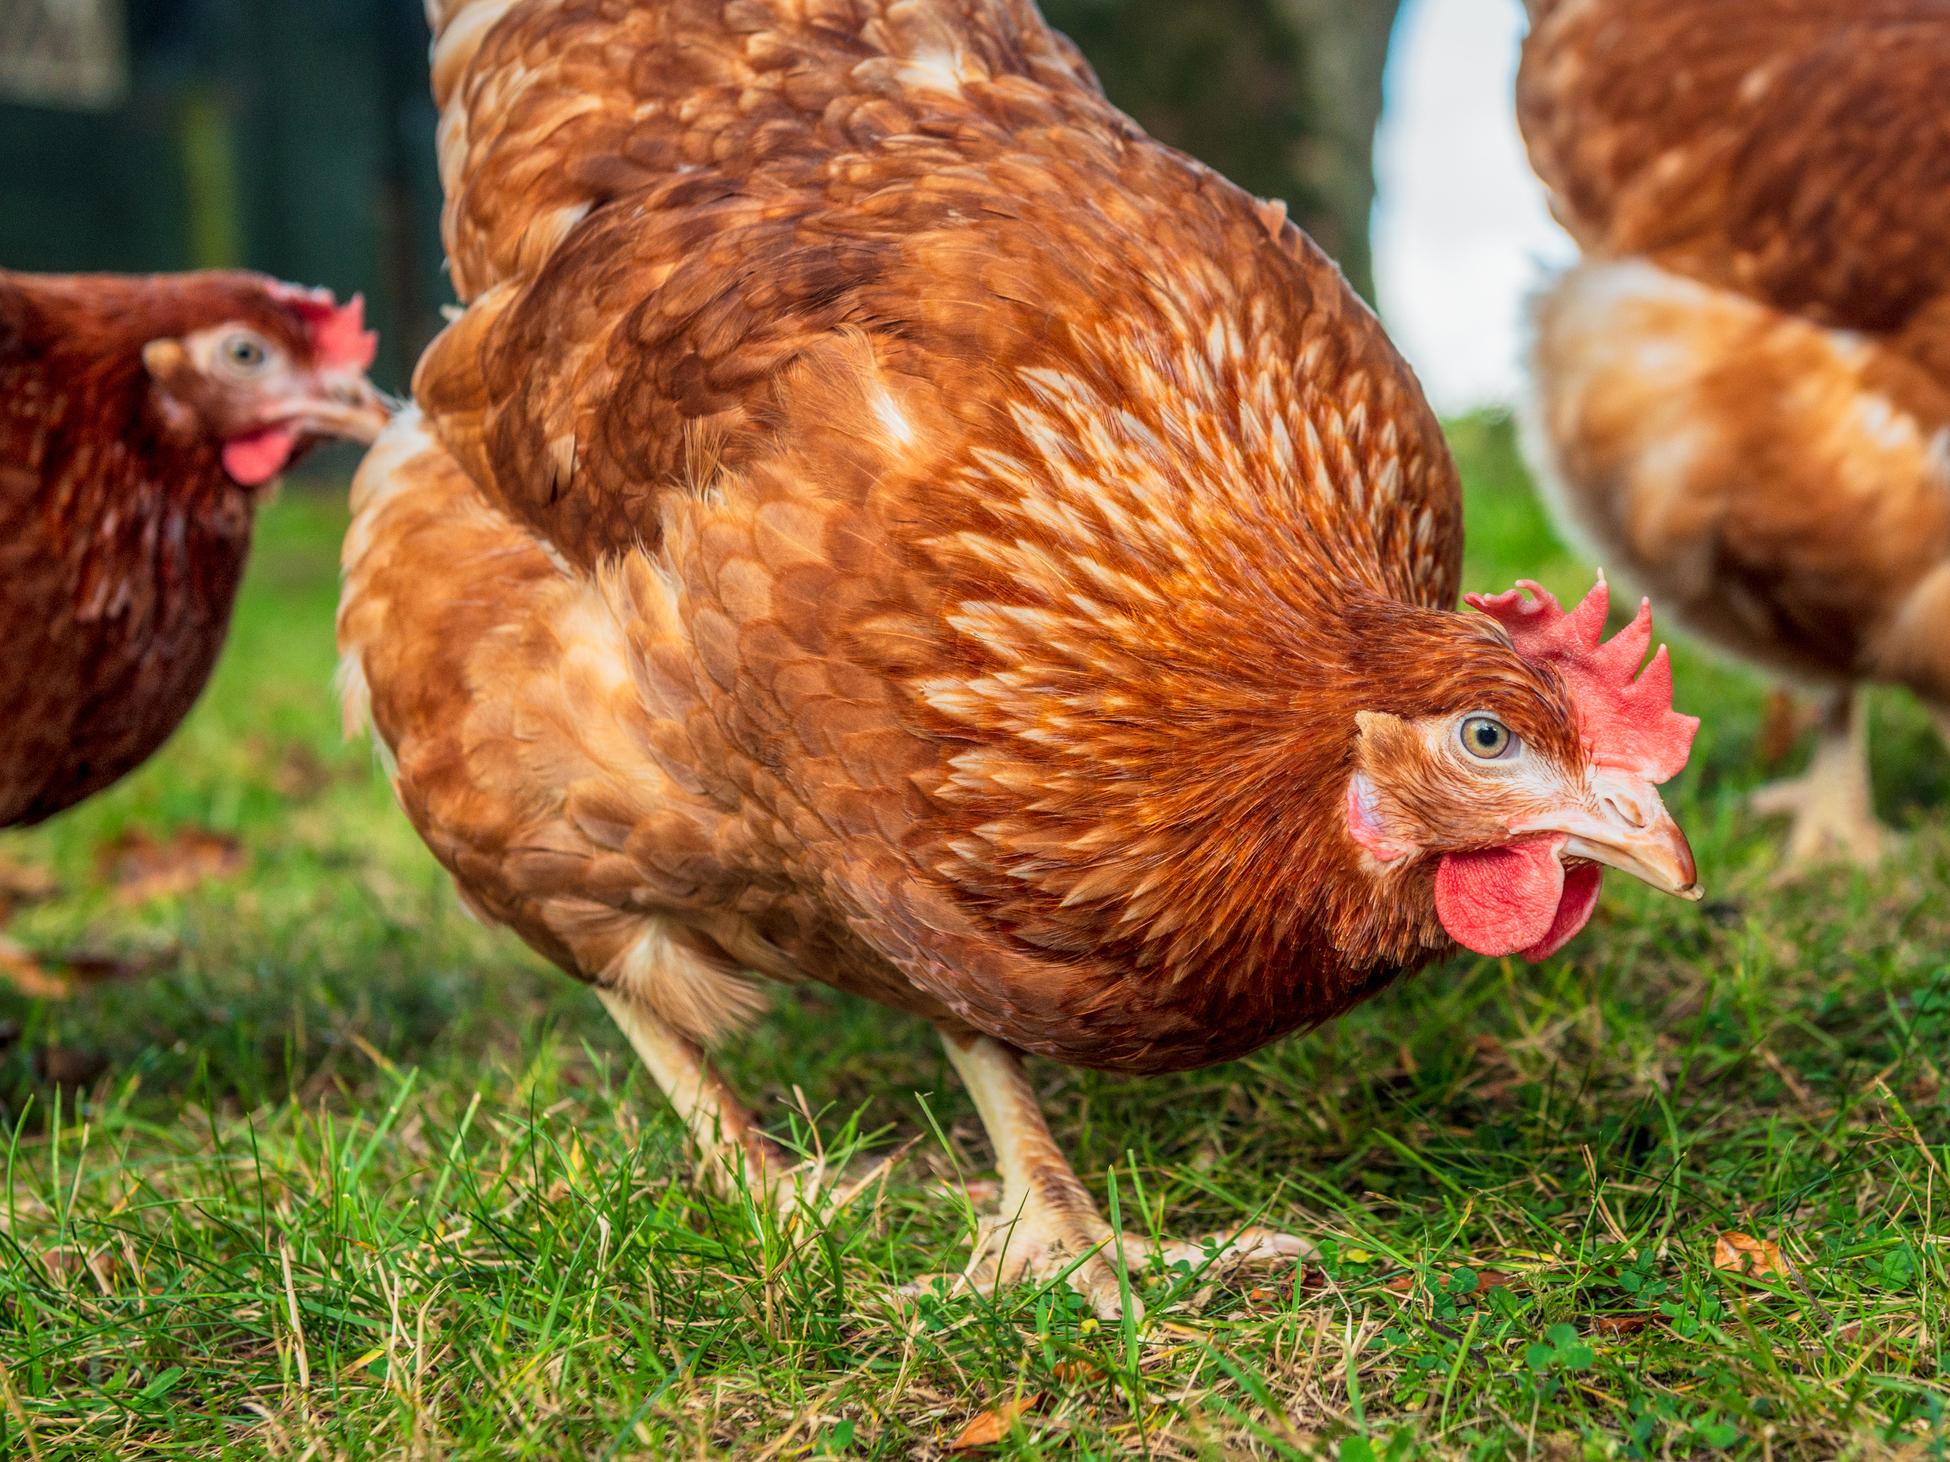 Chickens are potential transmitters of new forms of flu to humans